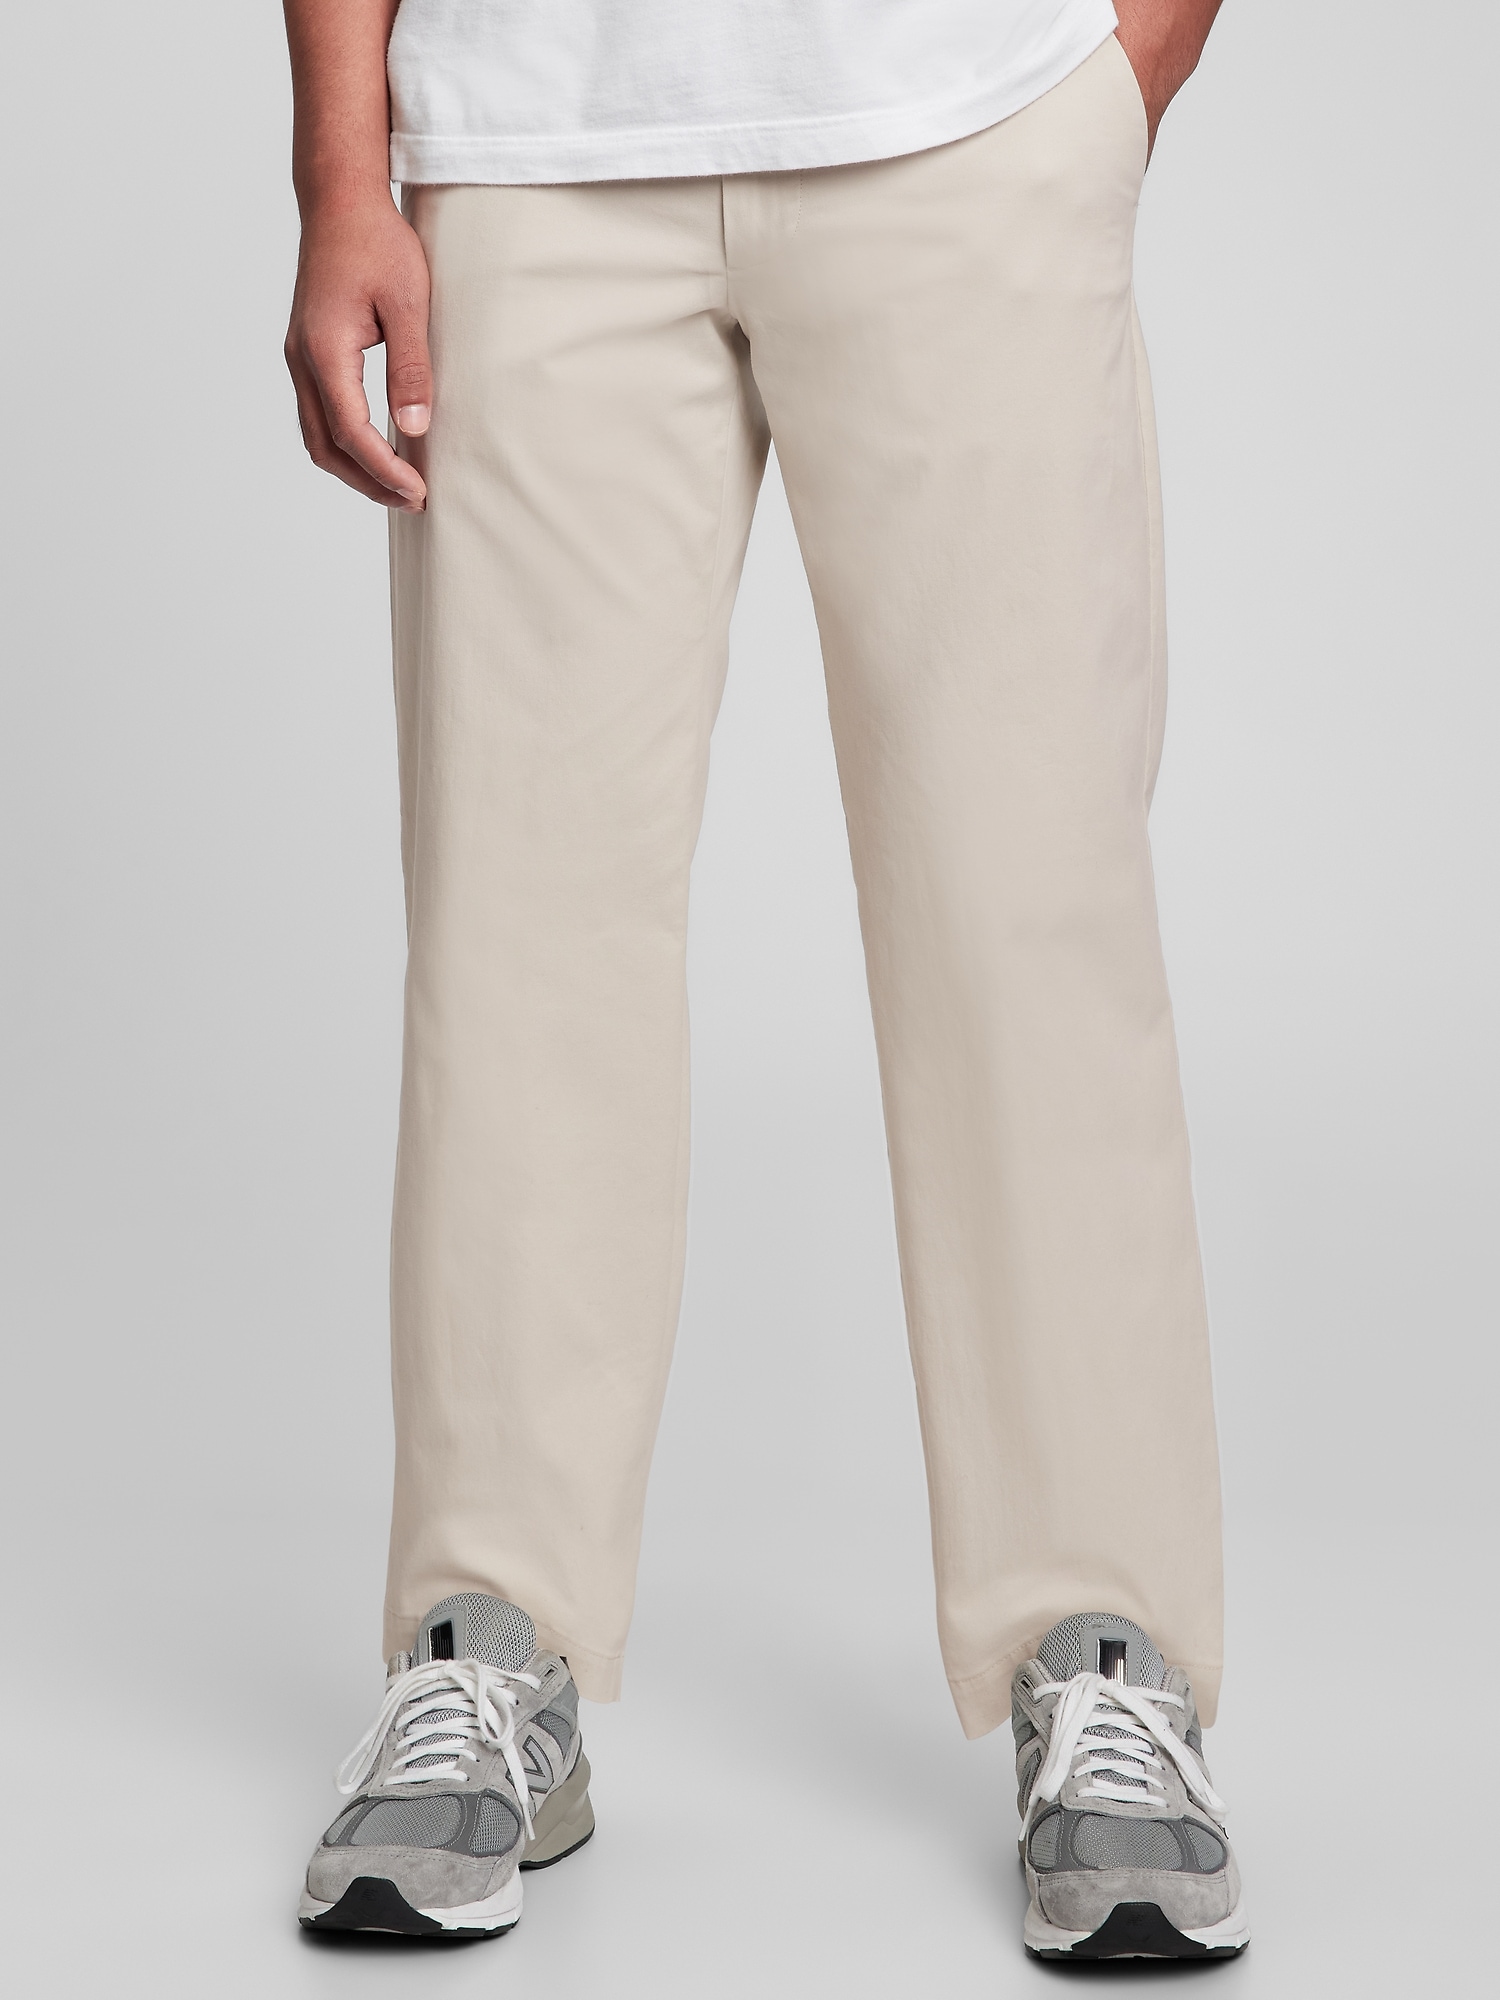 Gap Modern Khakis in Relaxed Fit with GapFlex beige. 1